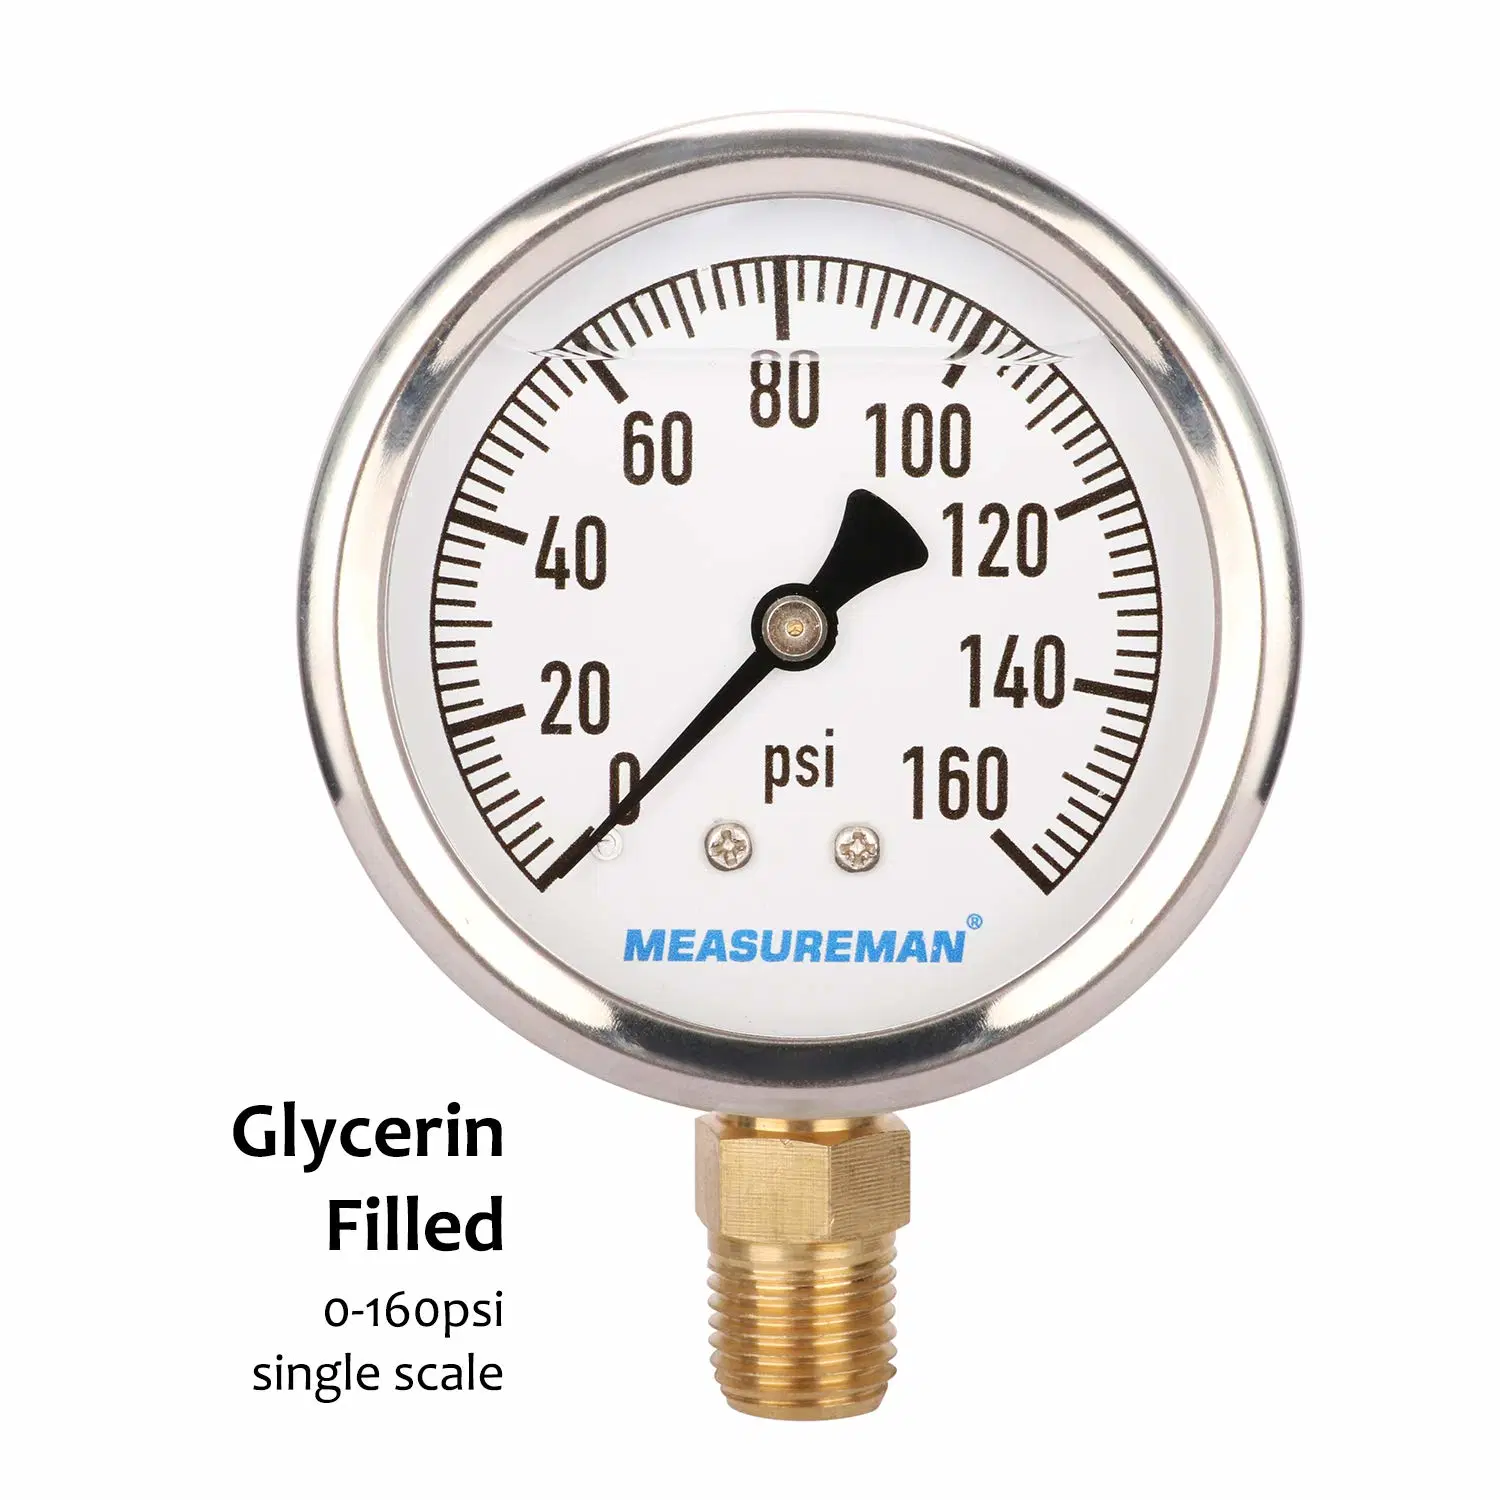 2.5'' Pressure Gauge 1/4 NPT Lower Mount Stainless Steel Case Brass Connector with Oil in It